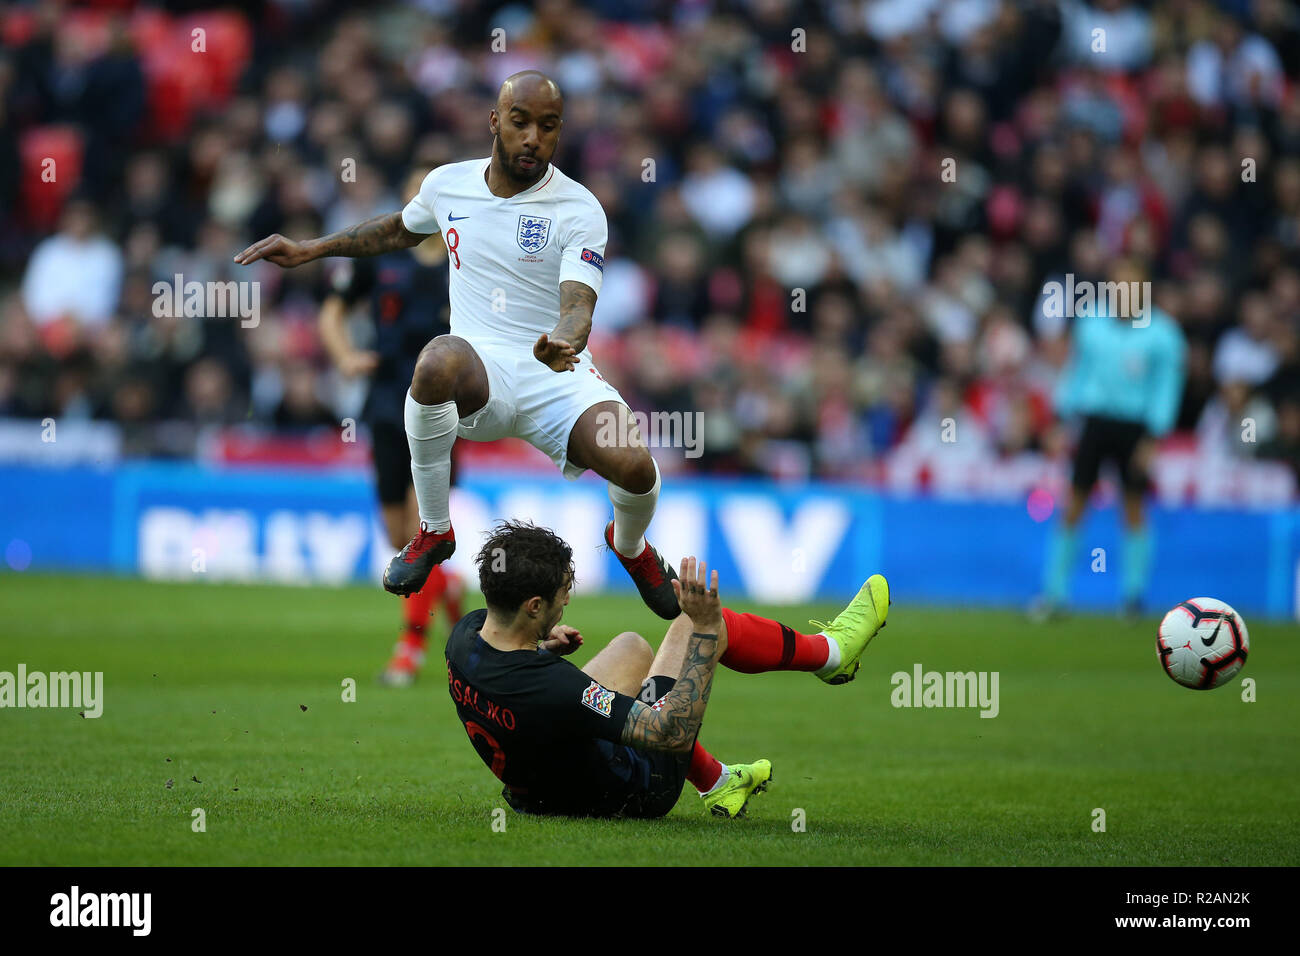 London, UK. 18th November 2018. London, UK. 18th November 2018. Fabian Delph of England is tackled by Sime Vrsaljko of Croatia.UEFA Nations league A, group 4 match, England v Croatia at Wembley Stadium in London on Sunday 18th November 2018.  Please note images are for Editorial Use Only. pic by Andrew Orchard/Alamy Live news Credit: Andrew Orchard sports photography/Alamy Live News Stock Photo